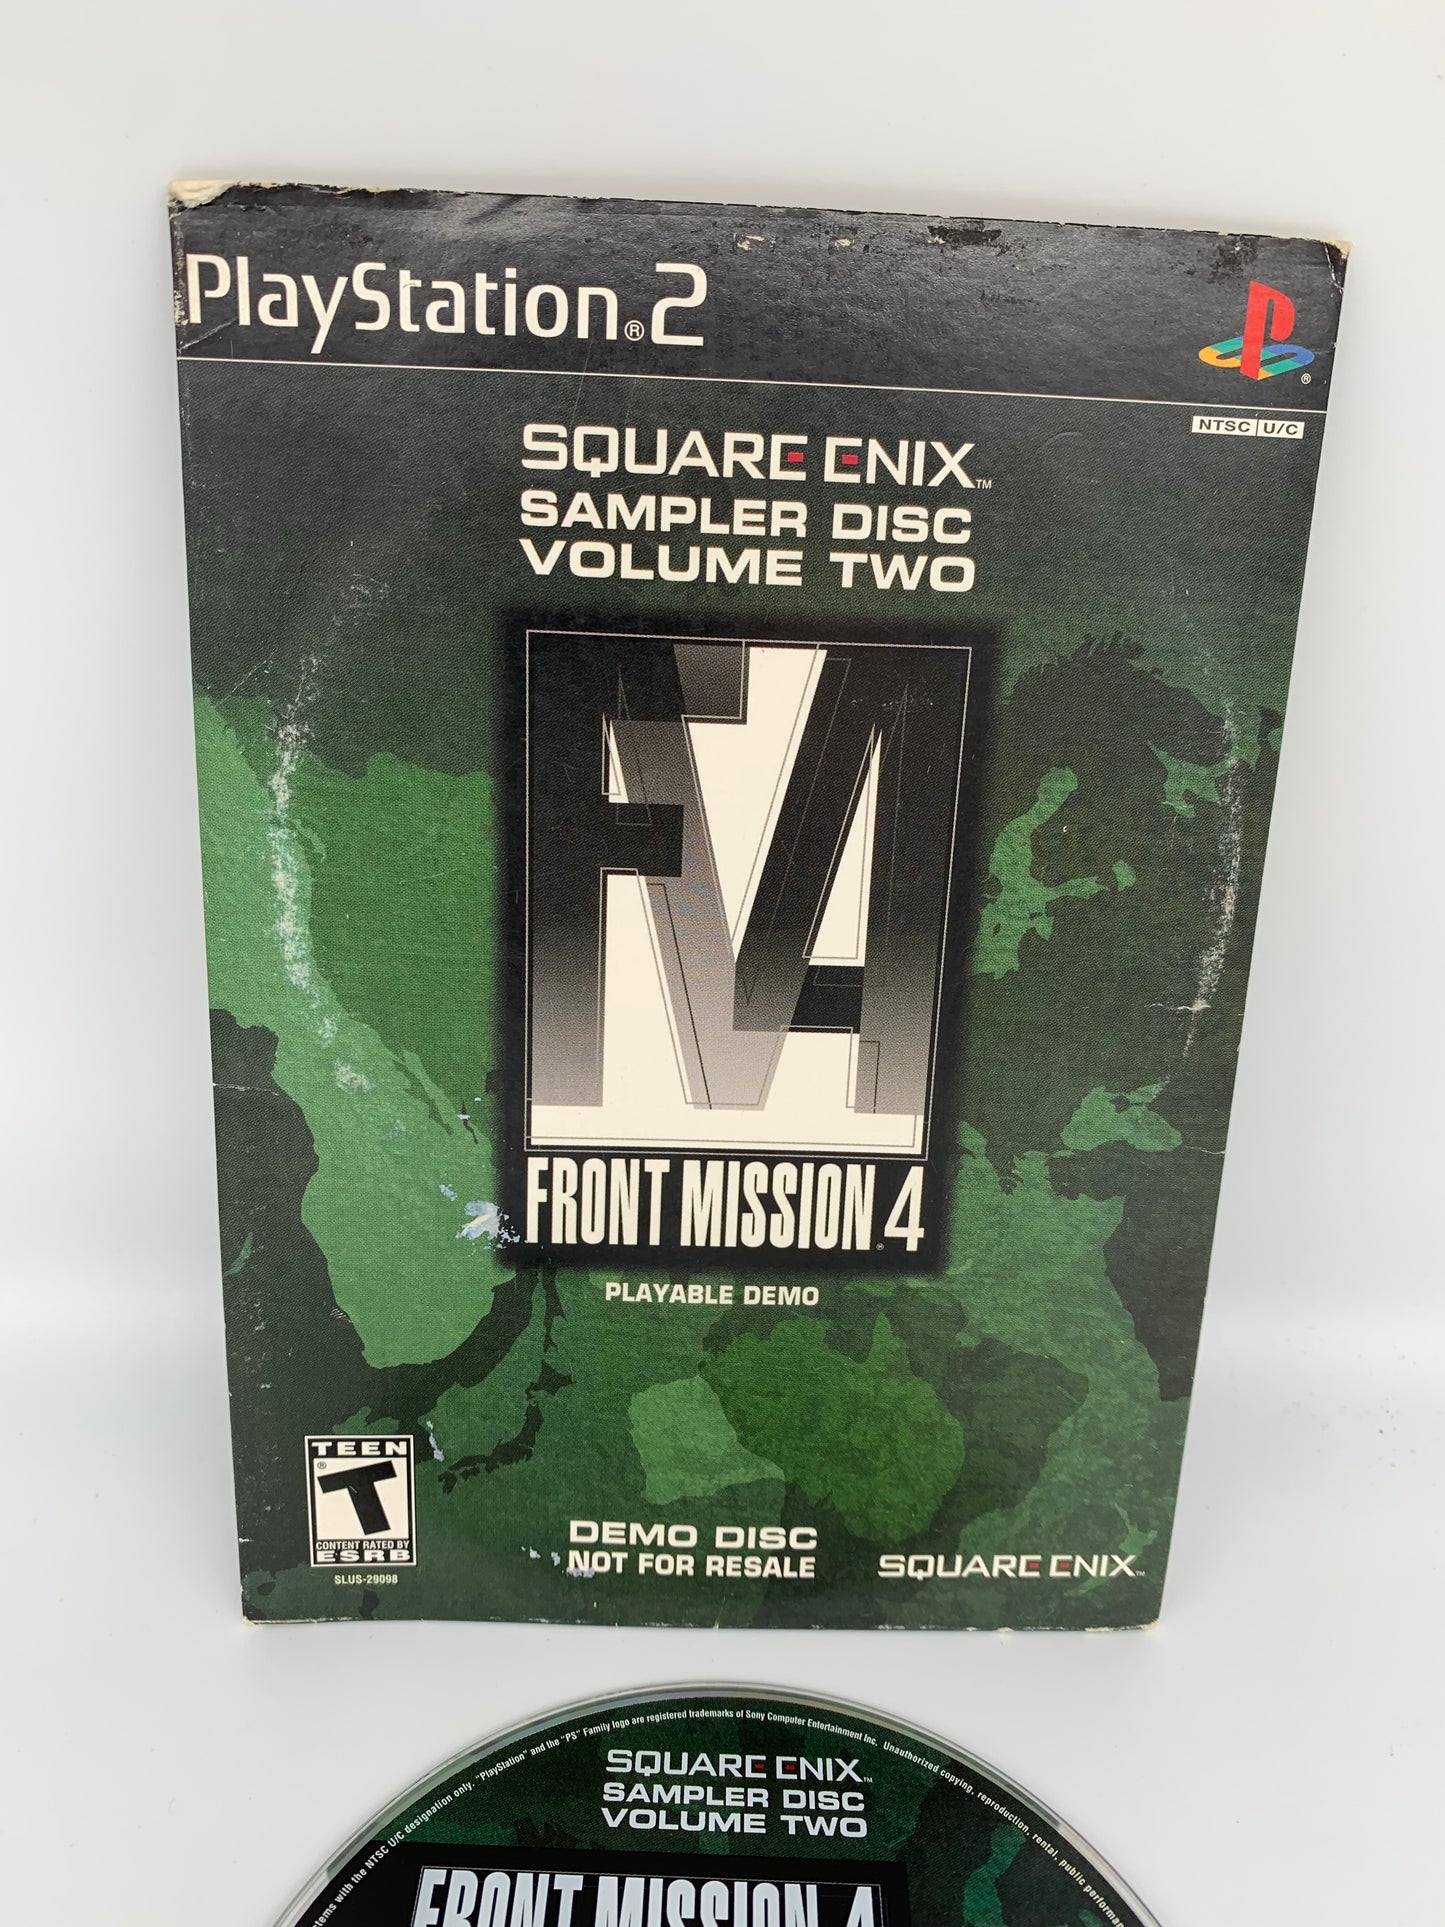 SONY PLAYSTATiON 2 [PS2] | SQUARE ENiX VOLUME 2 SAMPLER DiSC FRONT MiSSiON 4 DEMO | NOT FOR RESALE